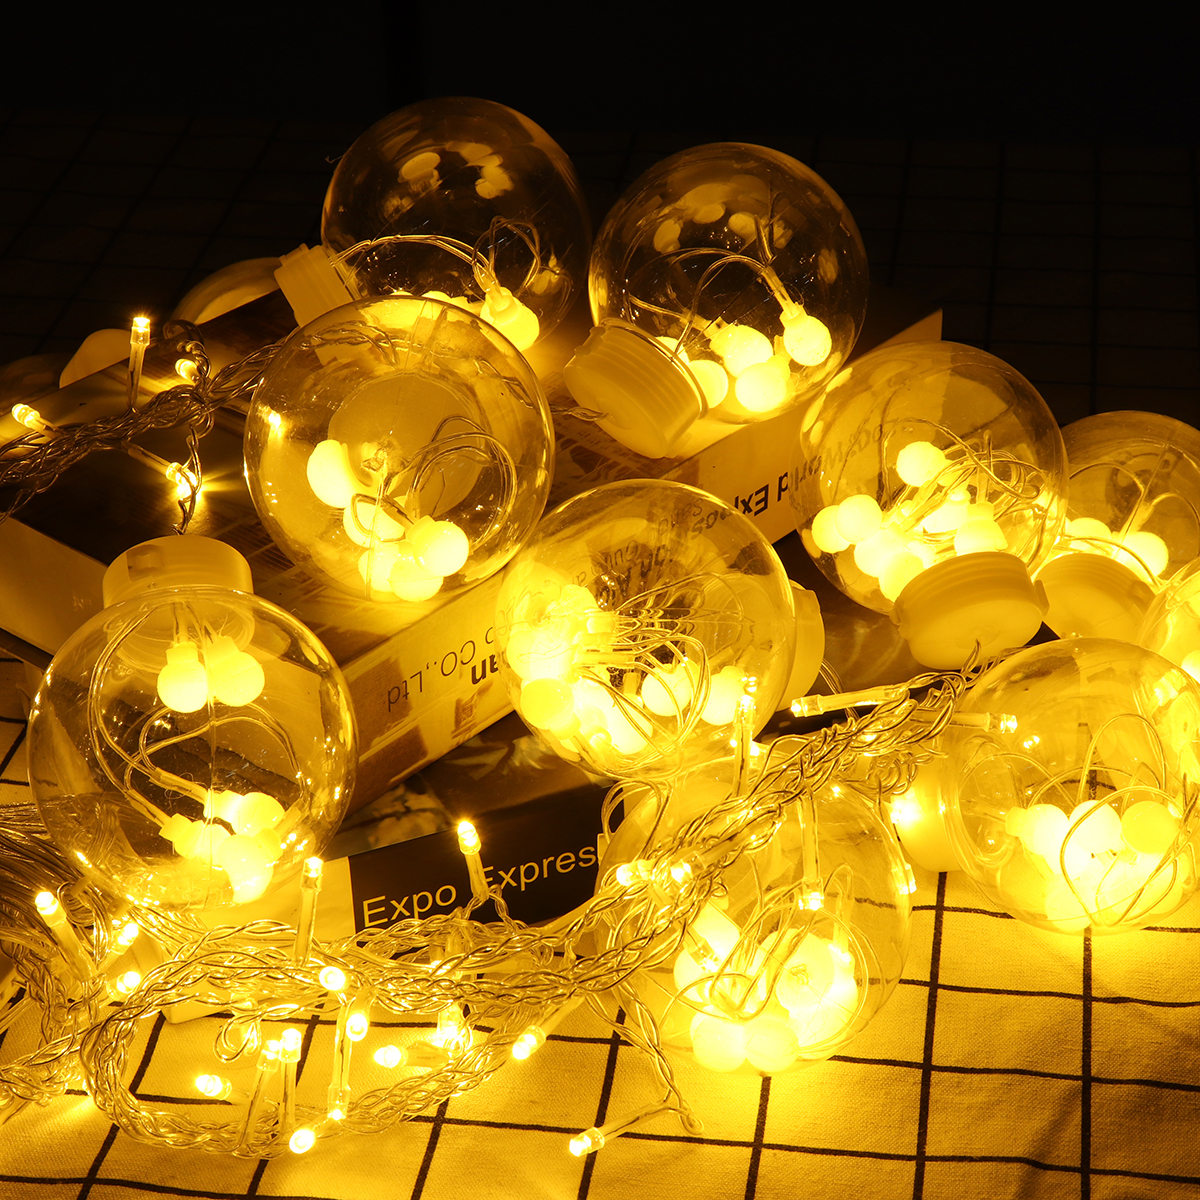 25M-Warm-White-Colorful-LED-Curtain-Fairy-Christmas-String-Light-Ball-Bulb-Home-Wedding-Party-Holida-1629932-4